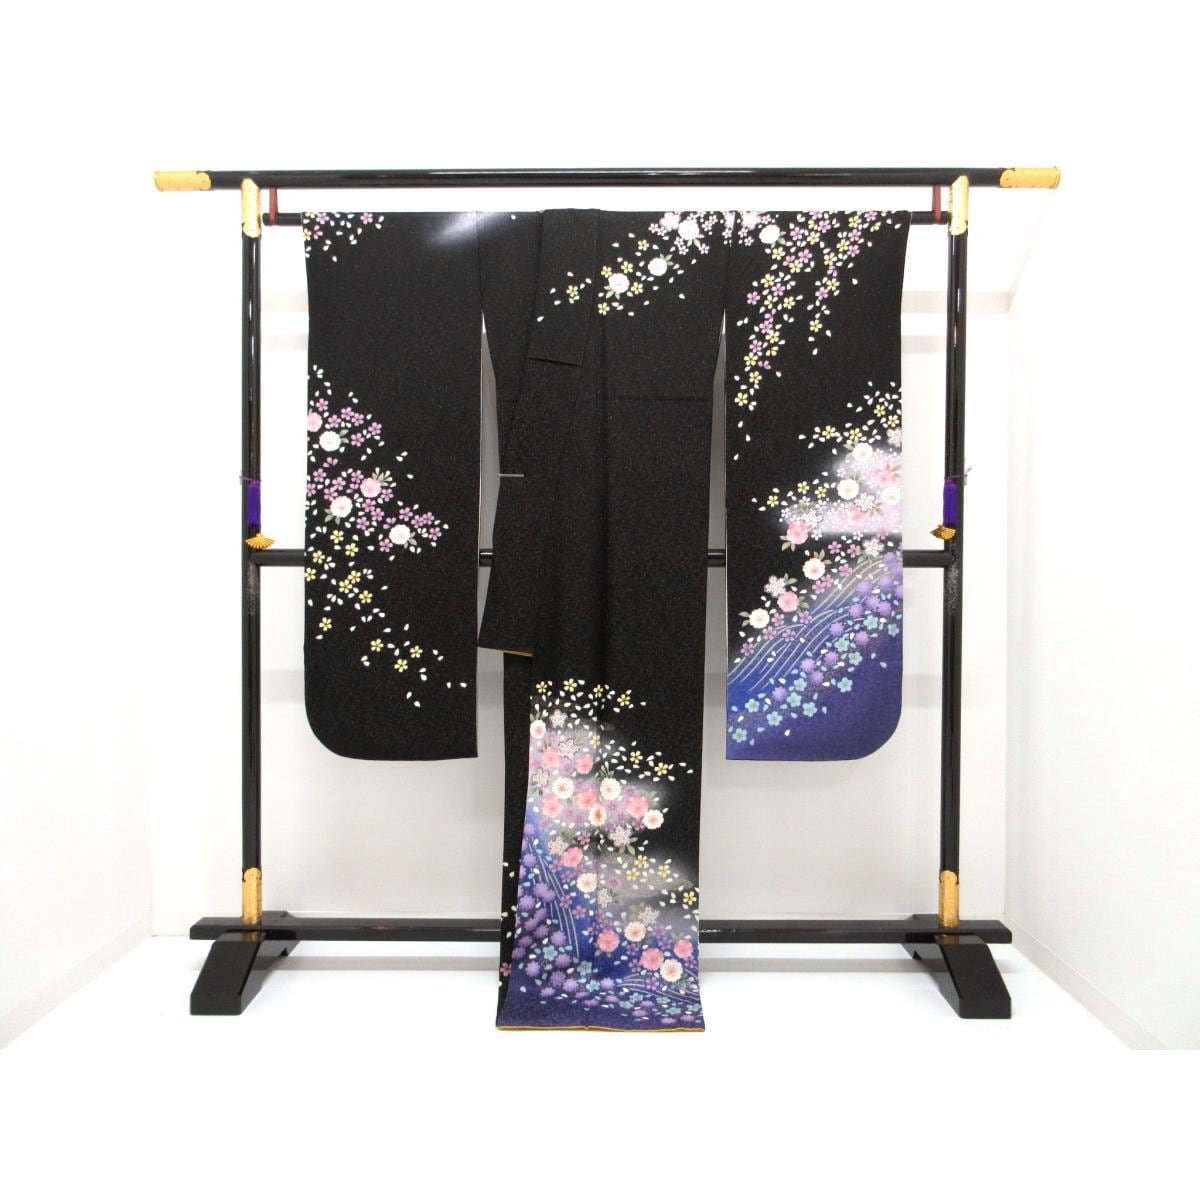 Kimono with gold thread and blurred dyeing, Yuzen gold leaf processing